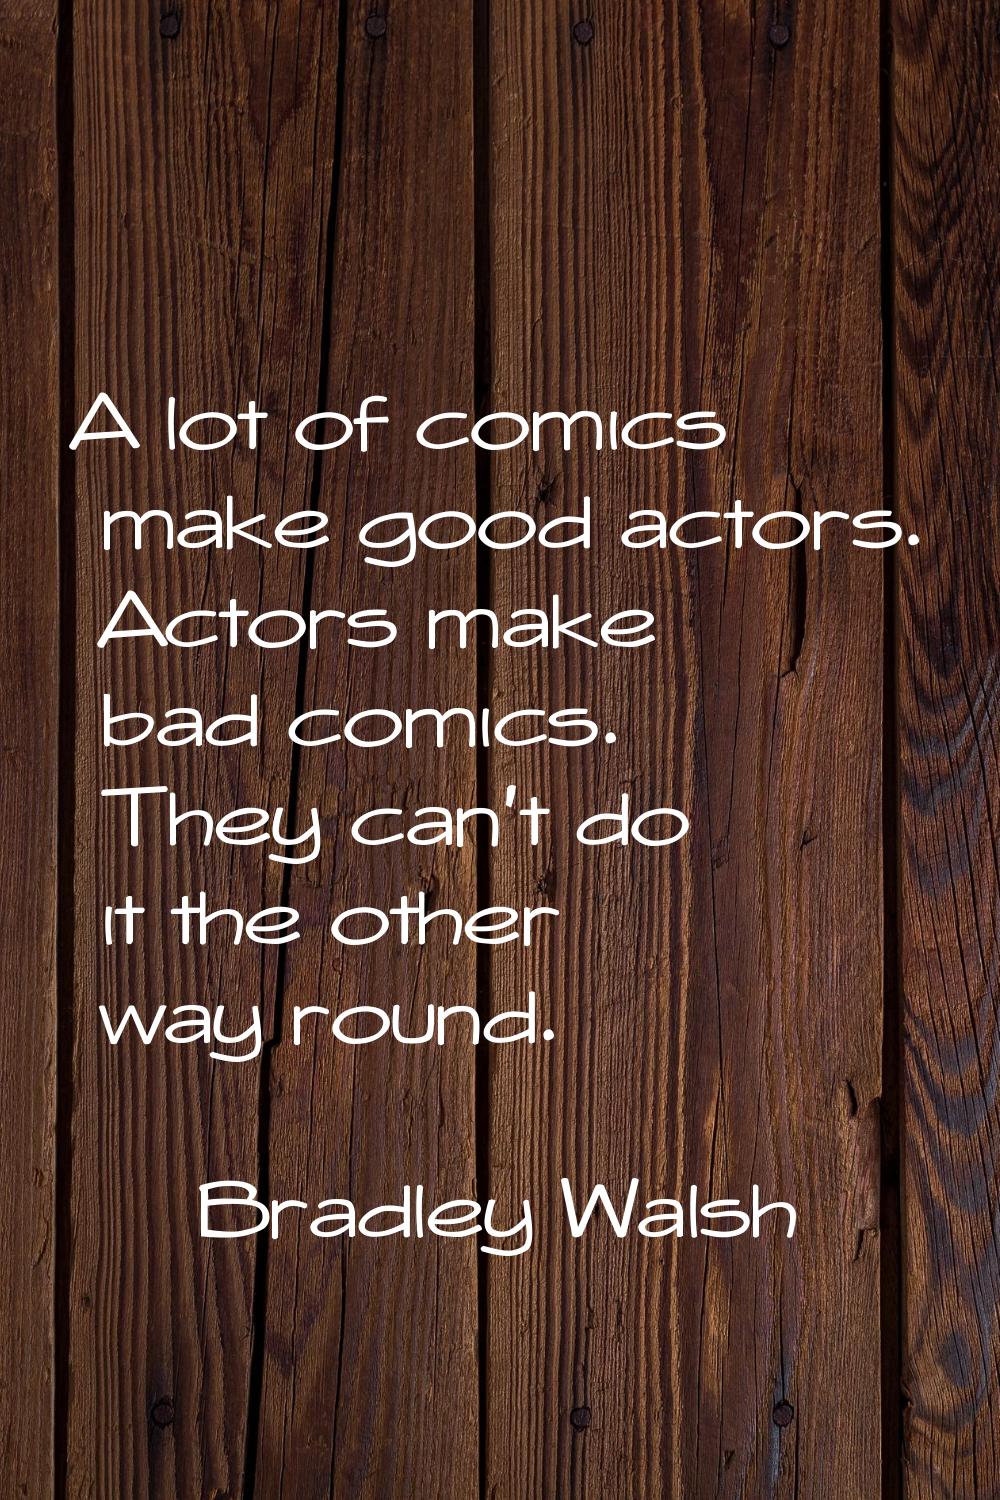 A lot of comics make good actors. Actors make bad comics. They can't do it the other way round.